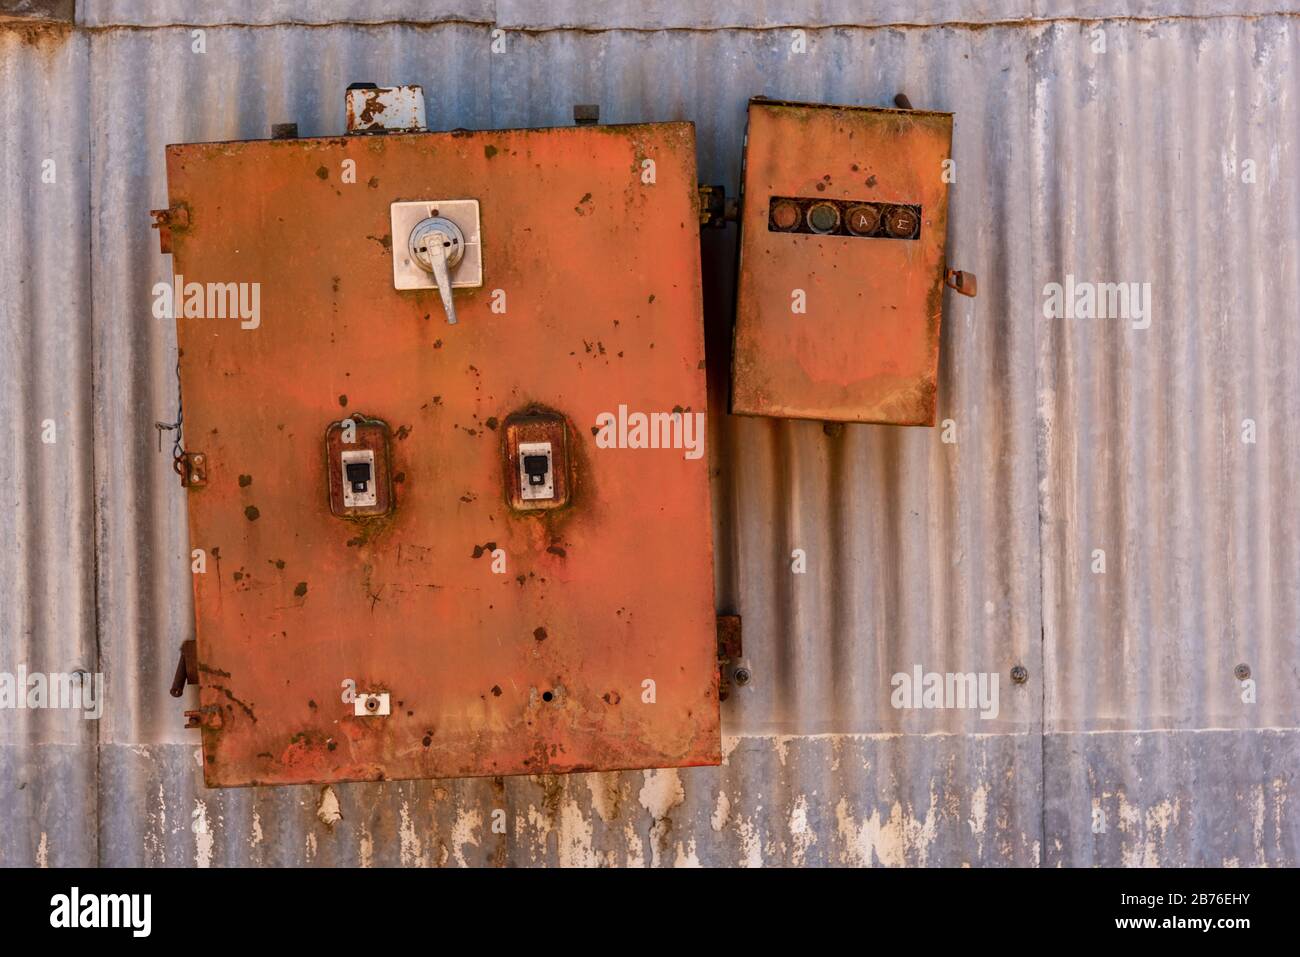 Old rusted iron electricity box with a textured metallic sheet background Stock Photo